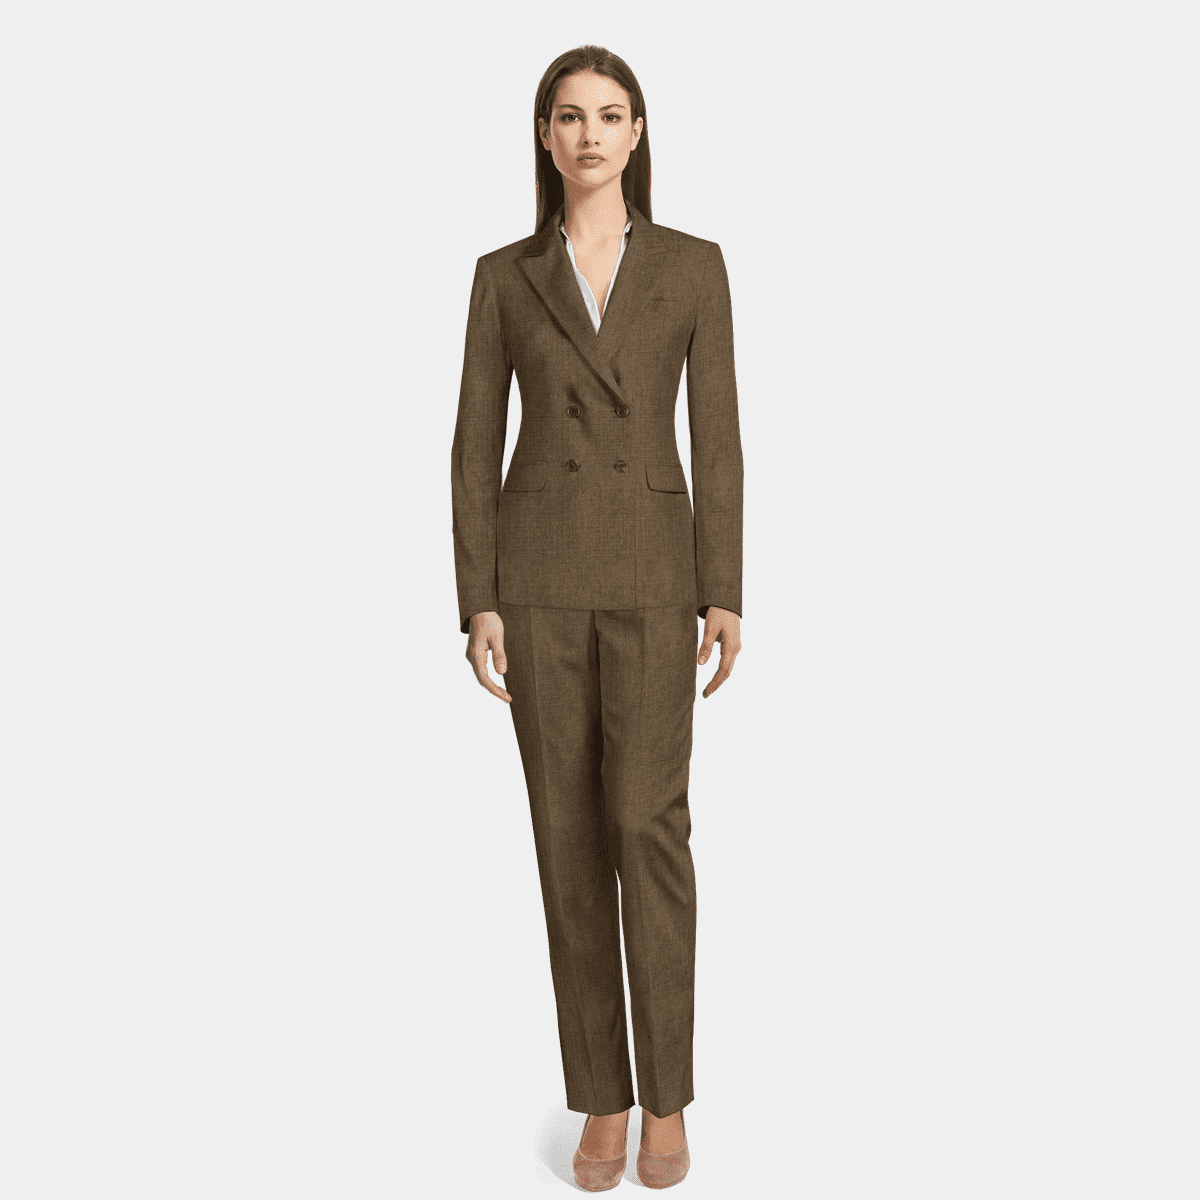 Premium Navy Blue double breasted wool Wide Leg Pant Suit - relaxed fit